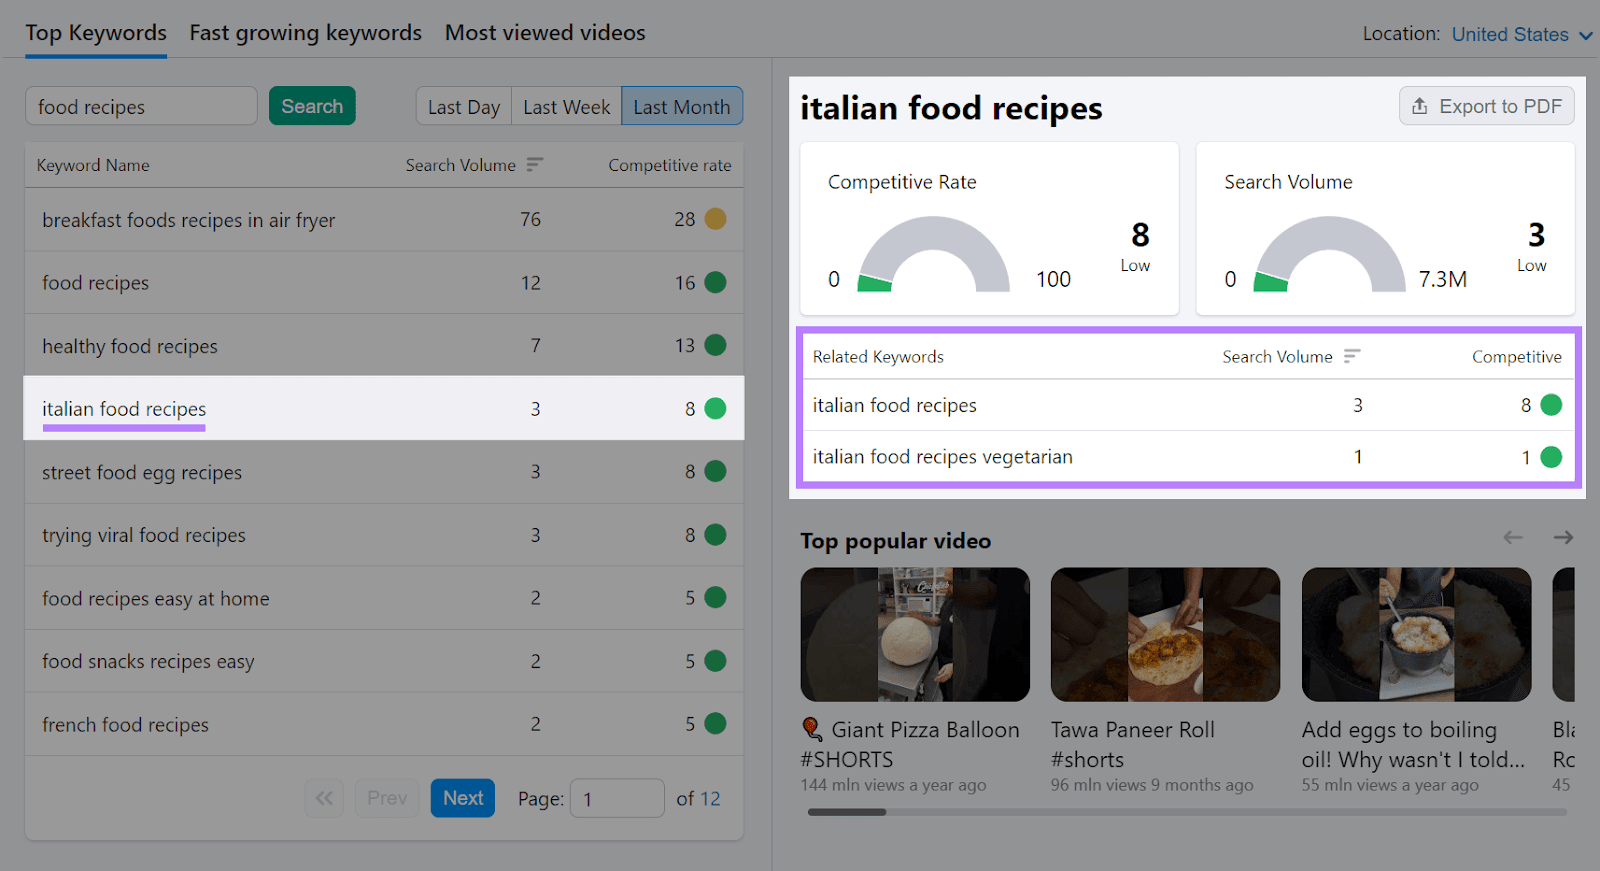 "italian nutrient  recipes" competitory  rate, hunt  volume, and related keywords